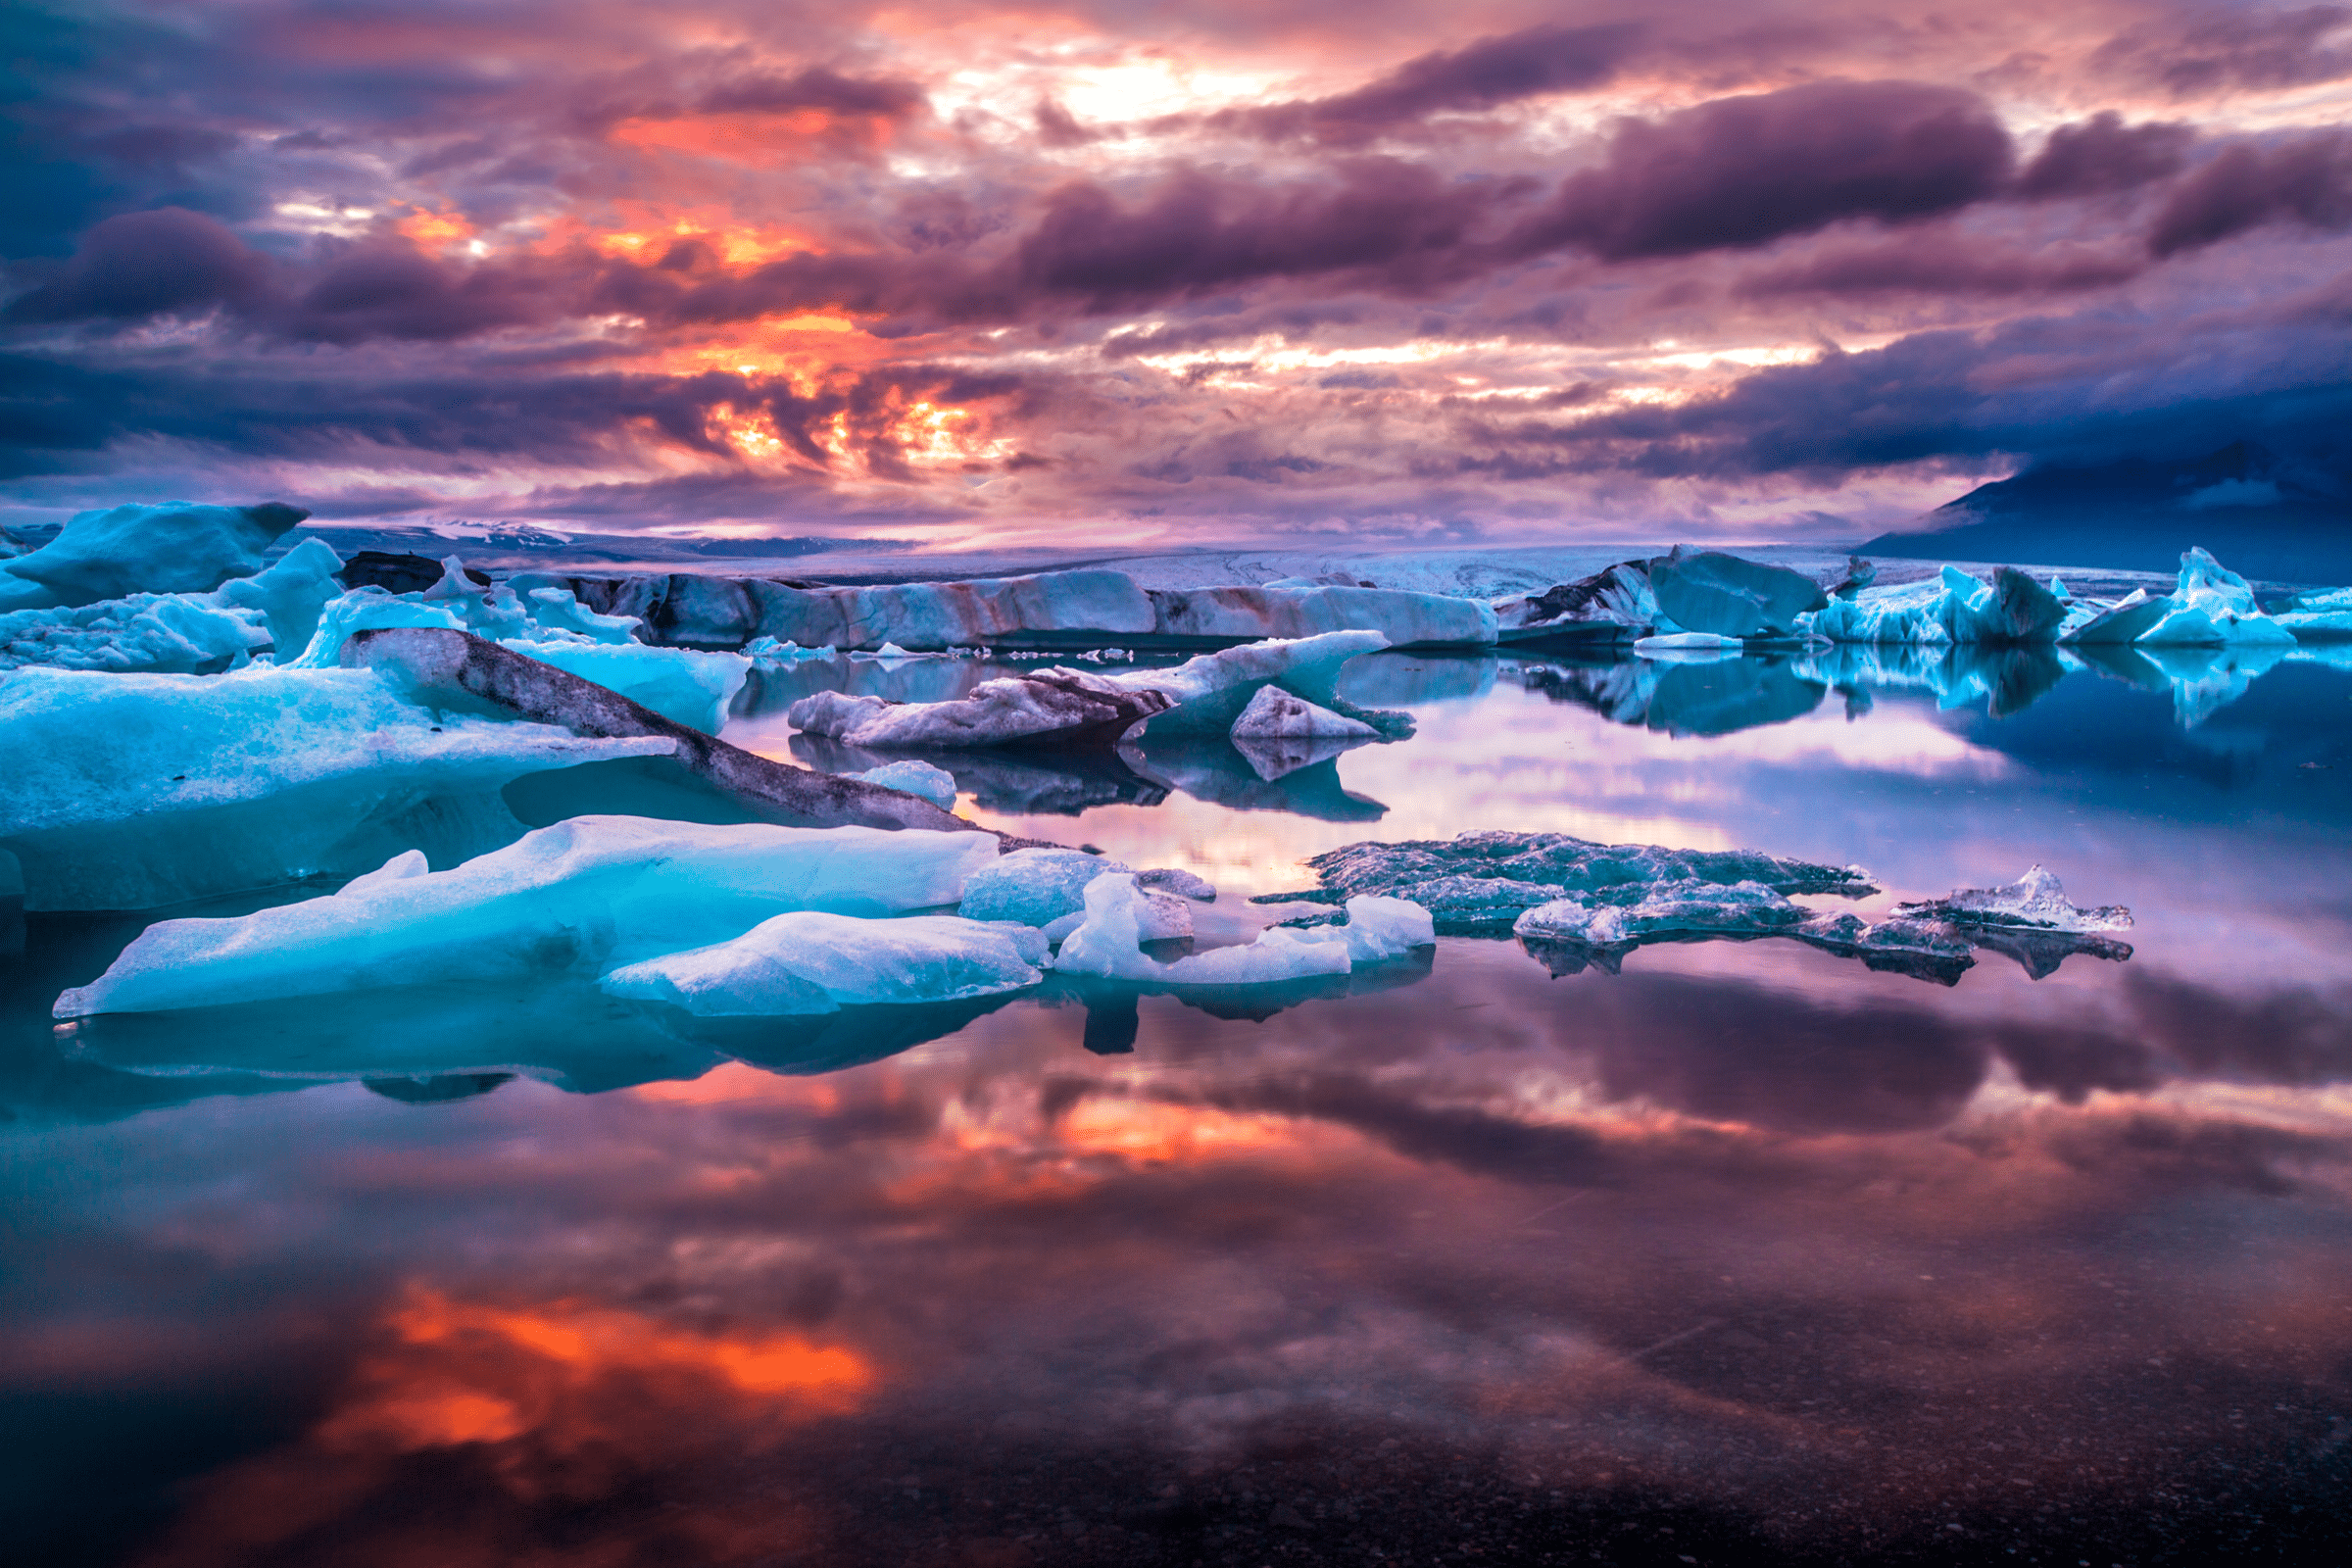 Pink skies reflected in a calm lagoon filled with white and blue icebergs, at Jökulsárlón Glacier Lagoon in Iceland